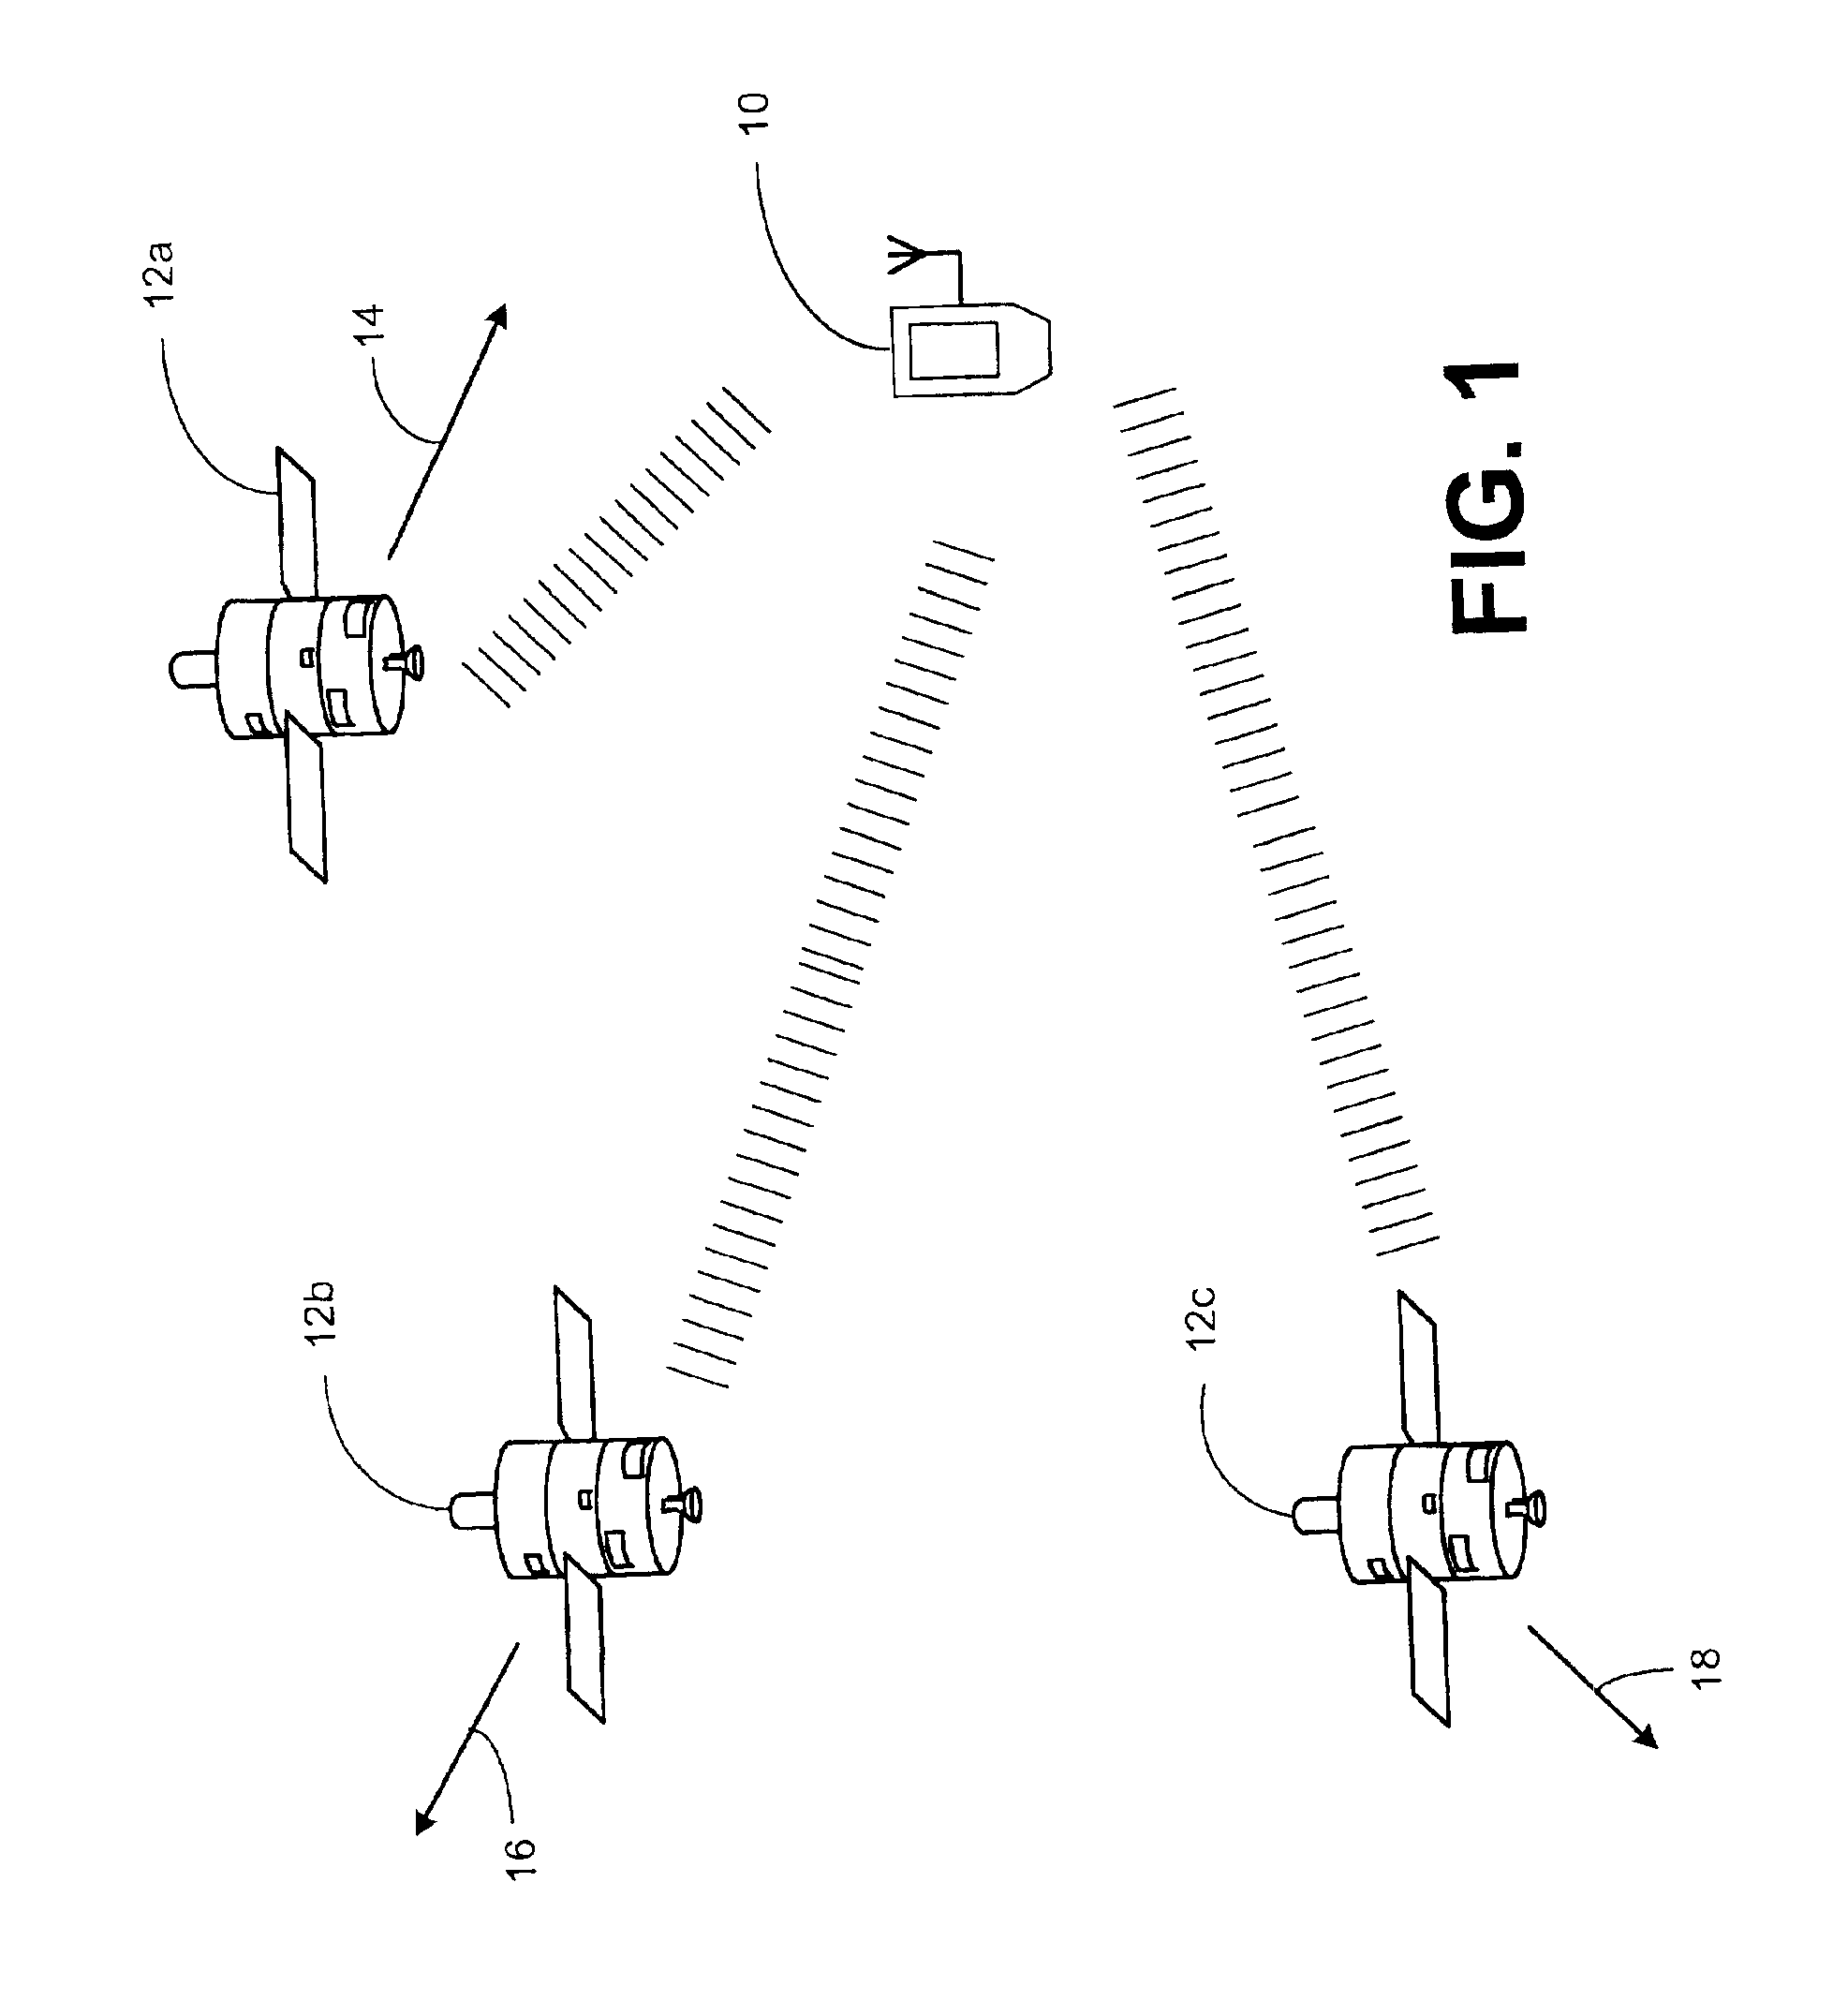 Signal detector employing a Doppler phase correction system